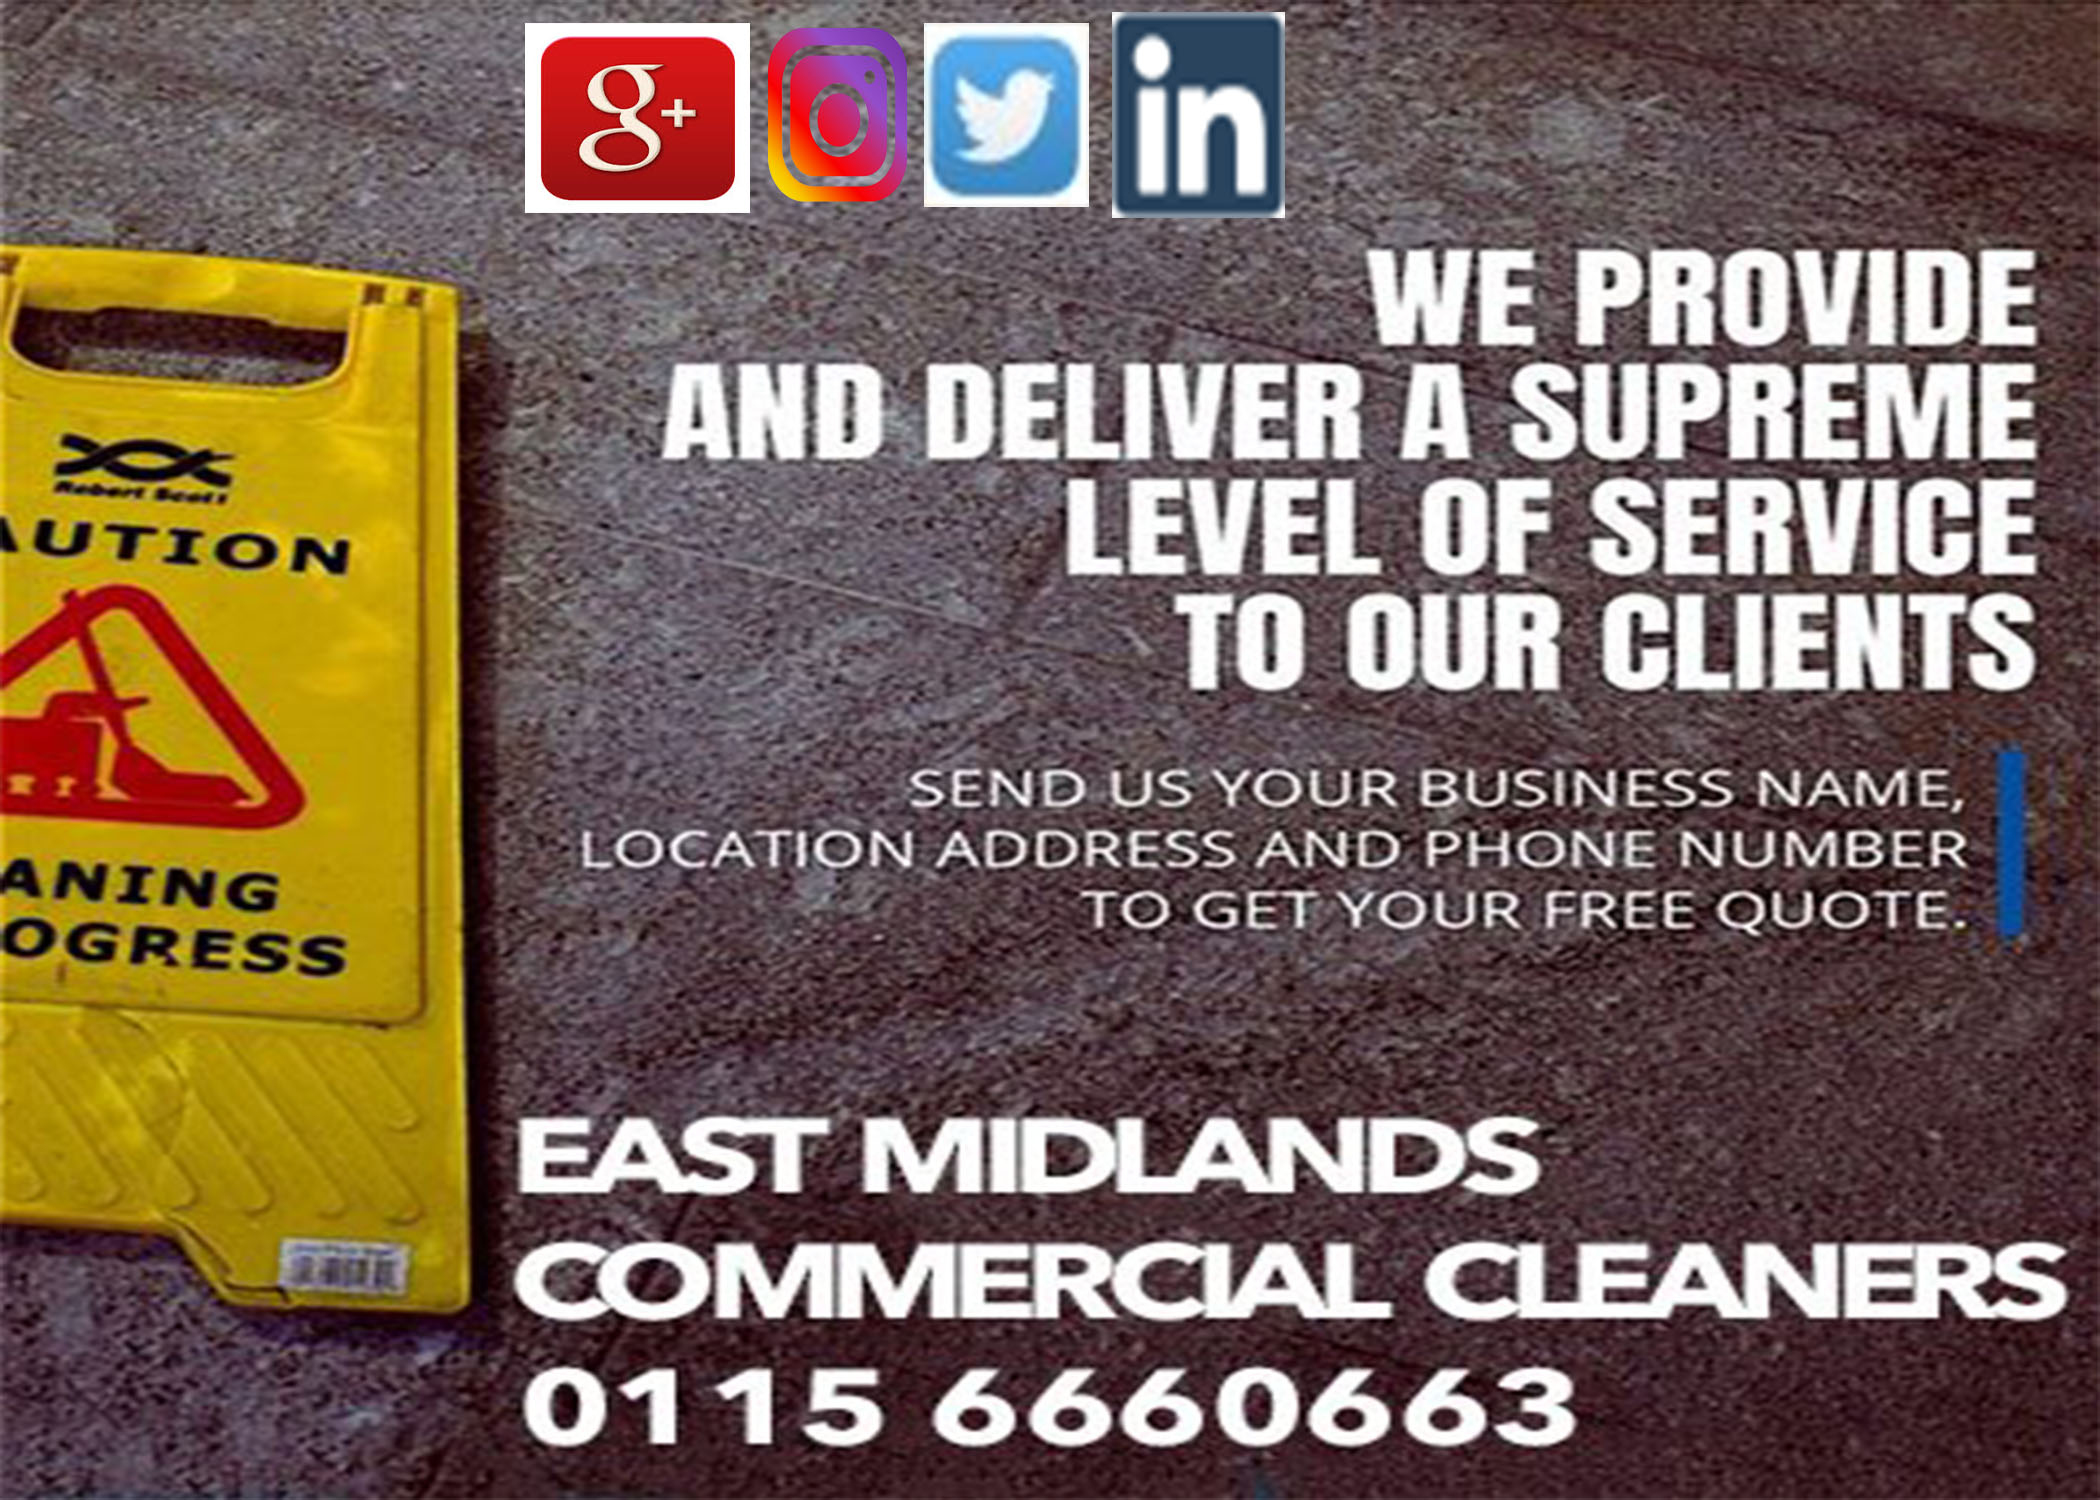 Main image for East Midlands commercial Cleaners 